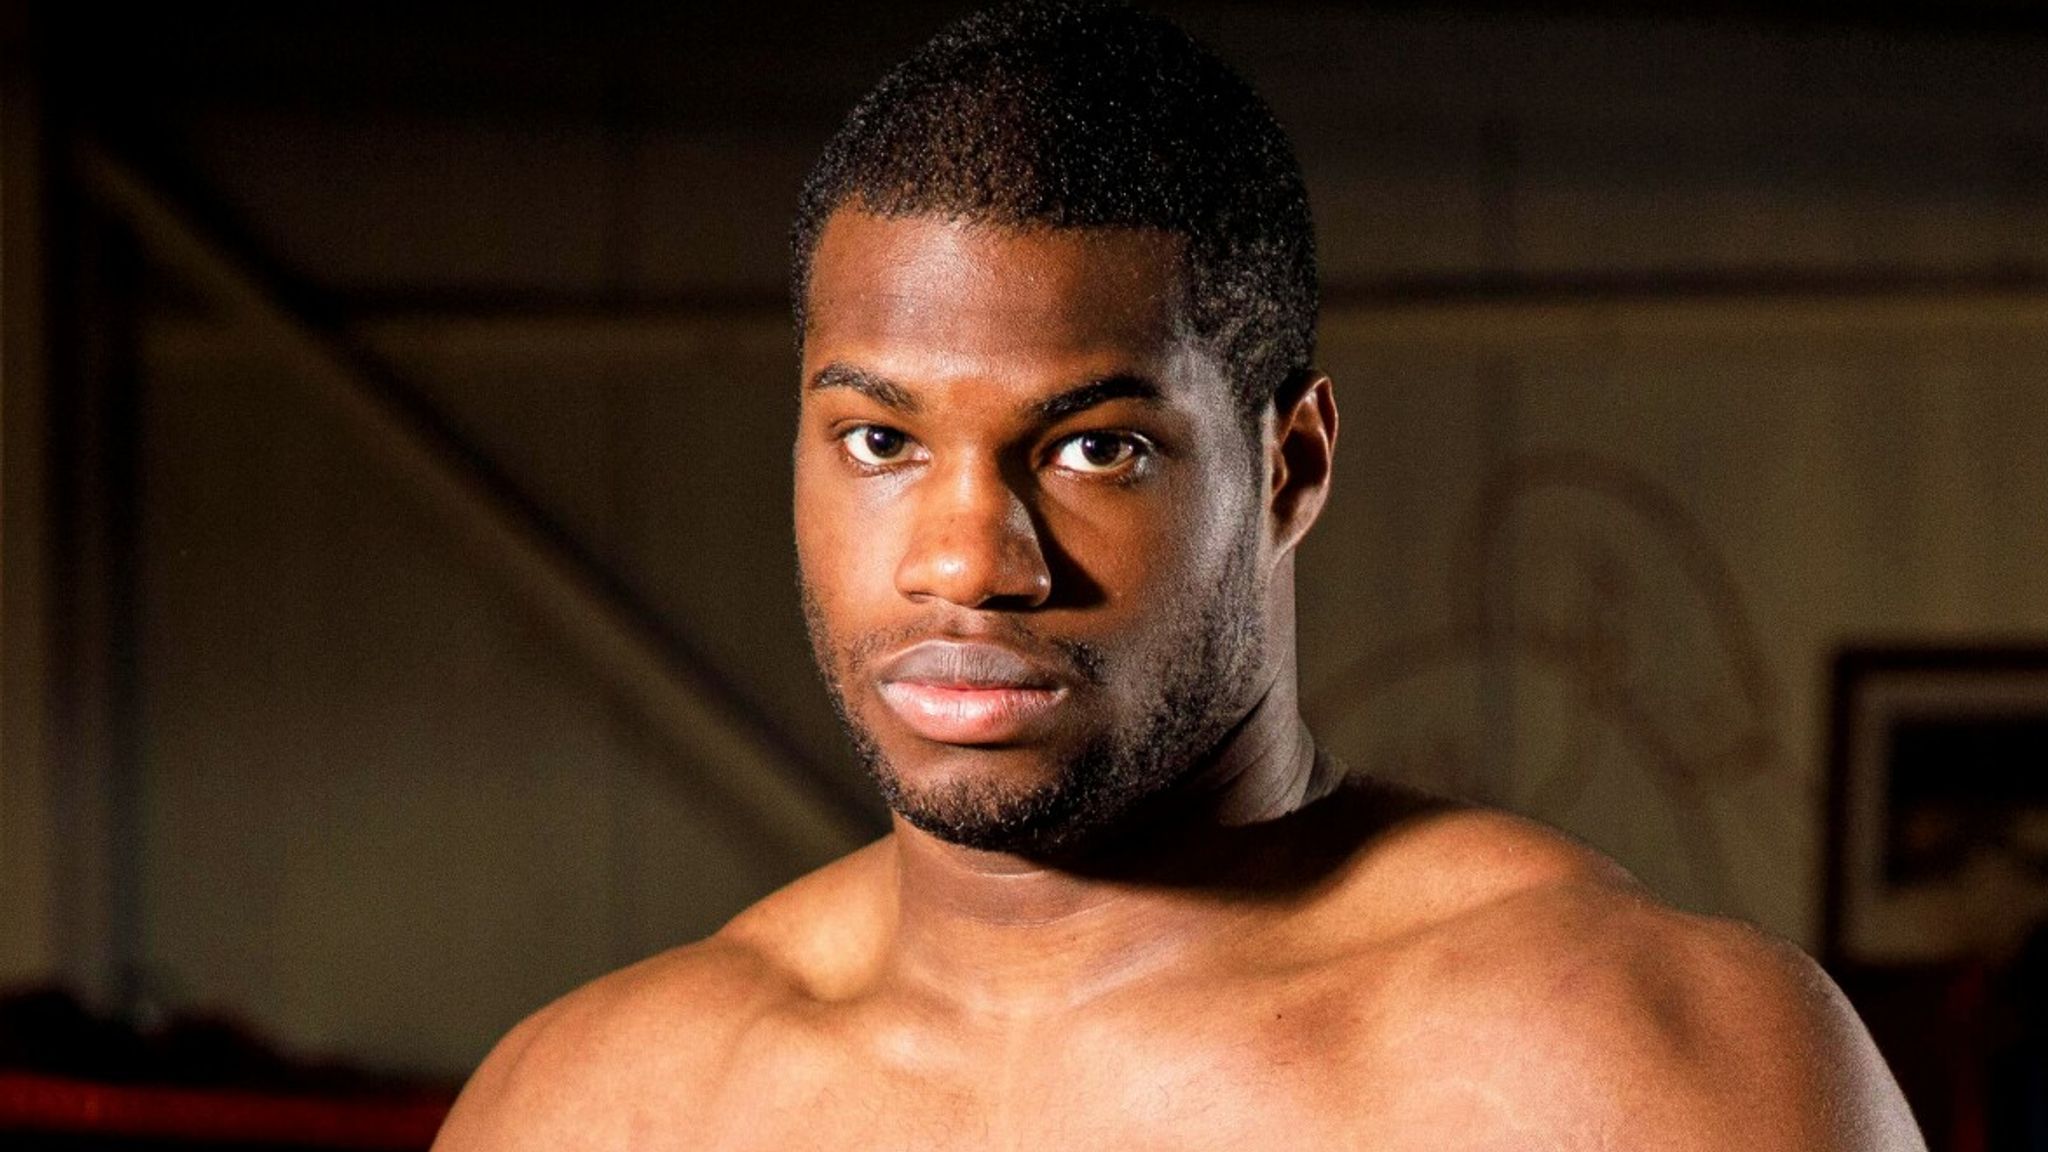 Boxing's greatest showman the star as Daniel Dubois chases heavyweight gold  in Miami